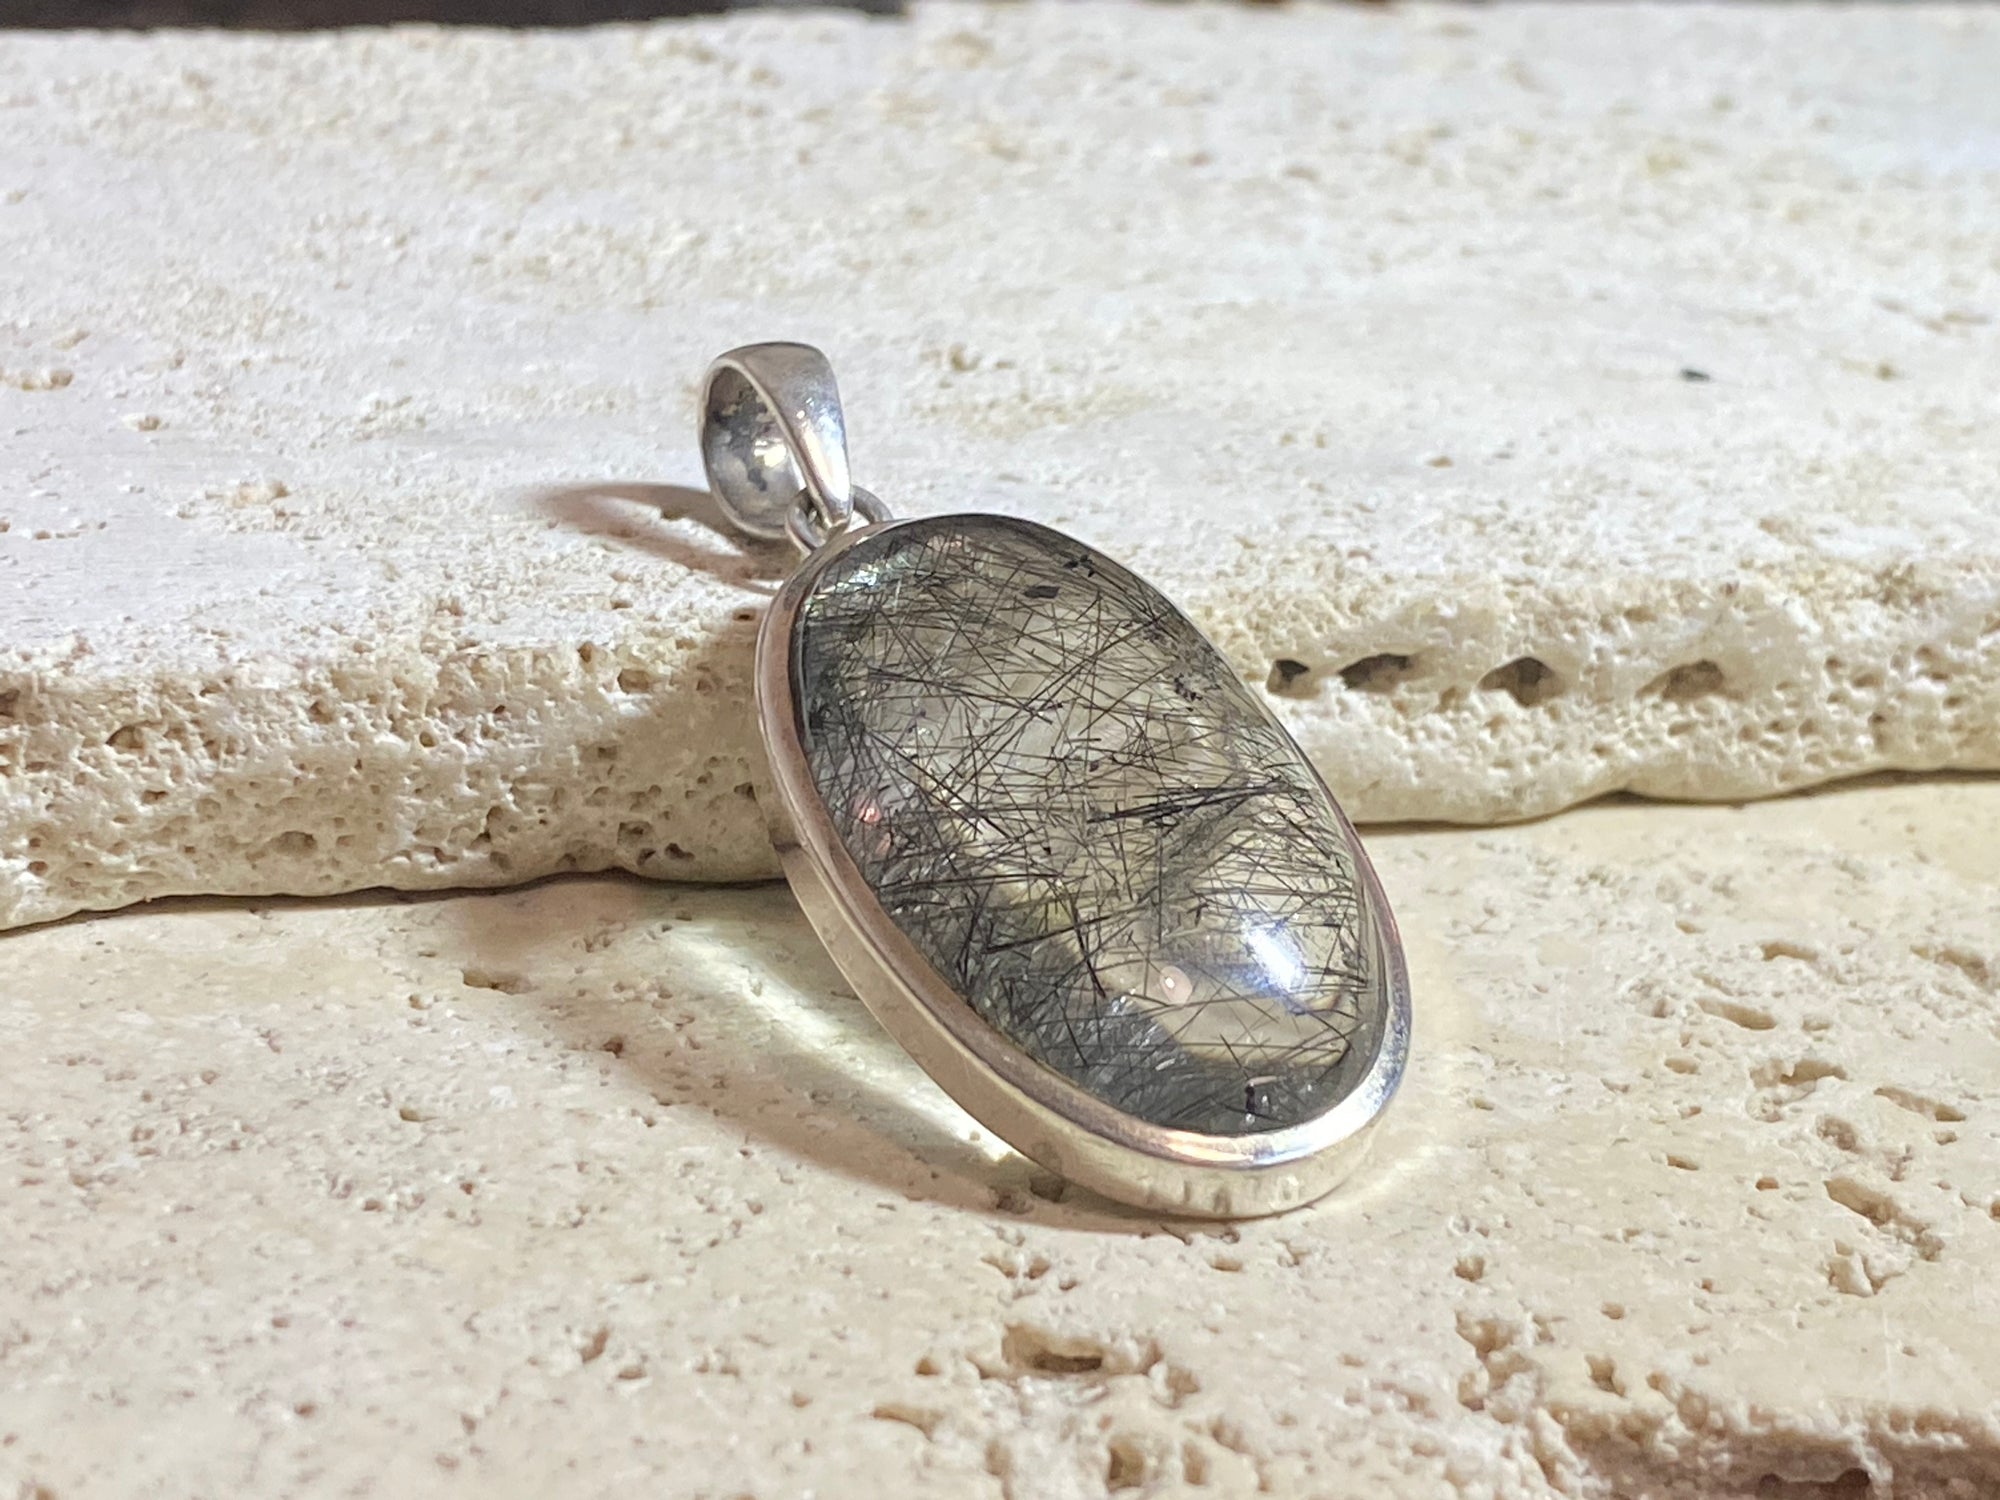 Large natural, tourmalated quartz stone pendant finished with a generous sterling silver mount and bail to emphasise its natural beauty. This is a stunning pendant that is a little out of the ordinary.